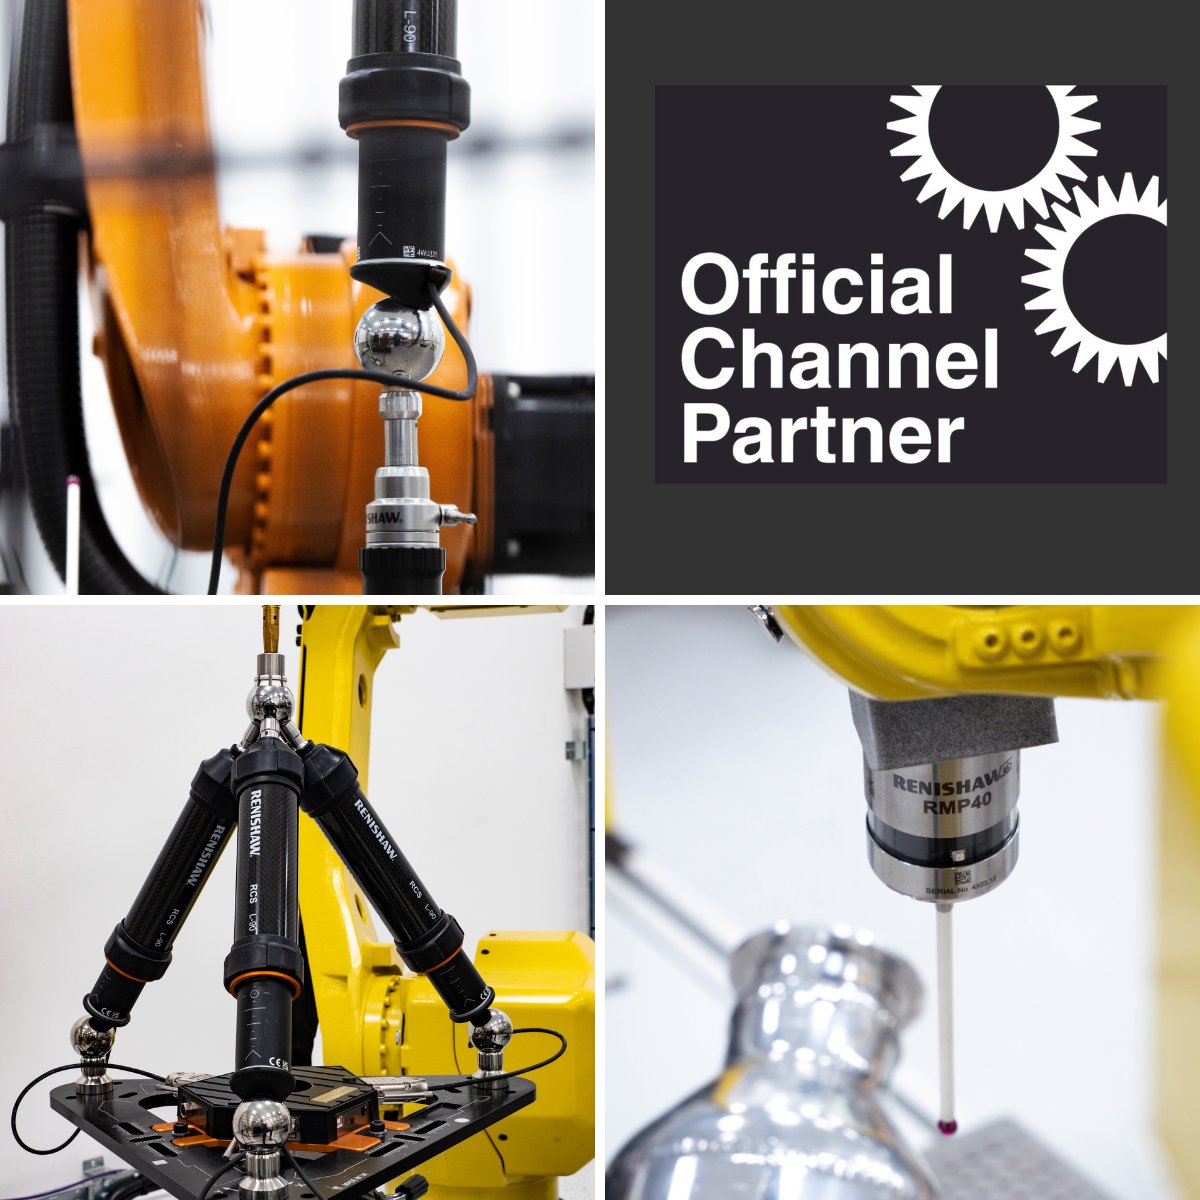 We're proud to announce that INSPHERE have become the first company to join the Renishaw Channel Partner Programme to specifically provide the Renishaw RCS product series. Find out more here insphereltd.com/renishaw-appoi…